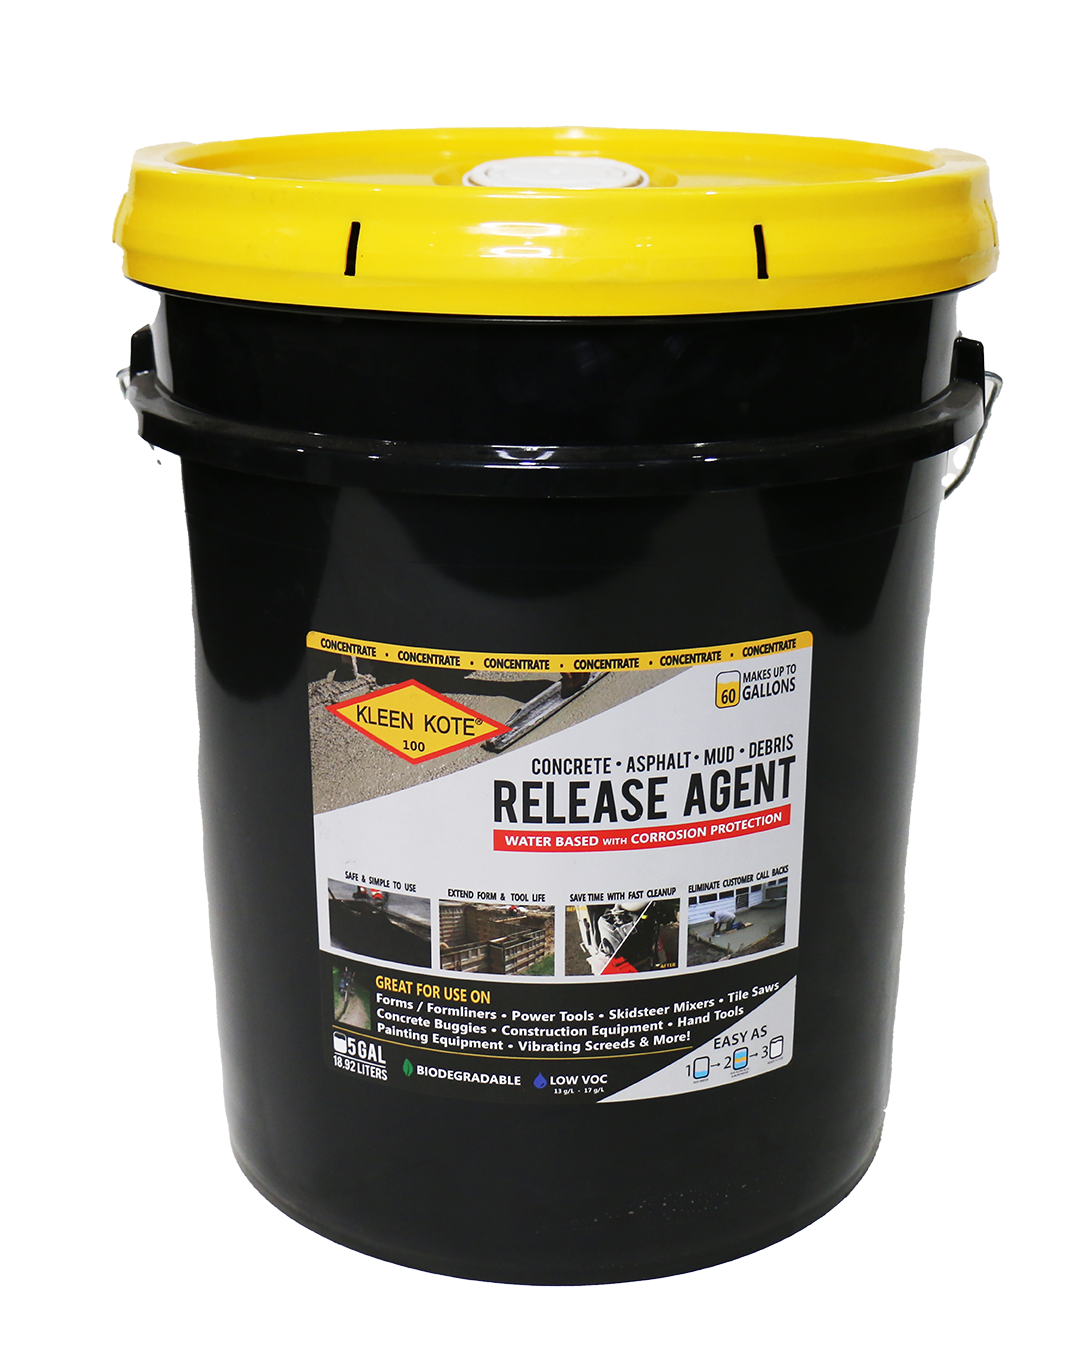 Kleen Kote 100 Water-Based Release Agent